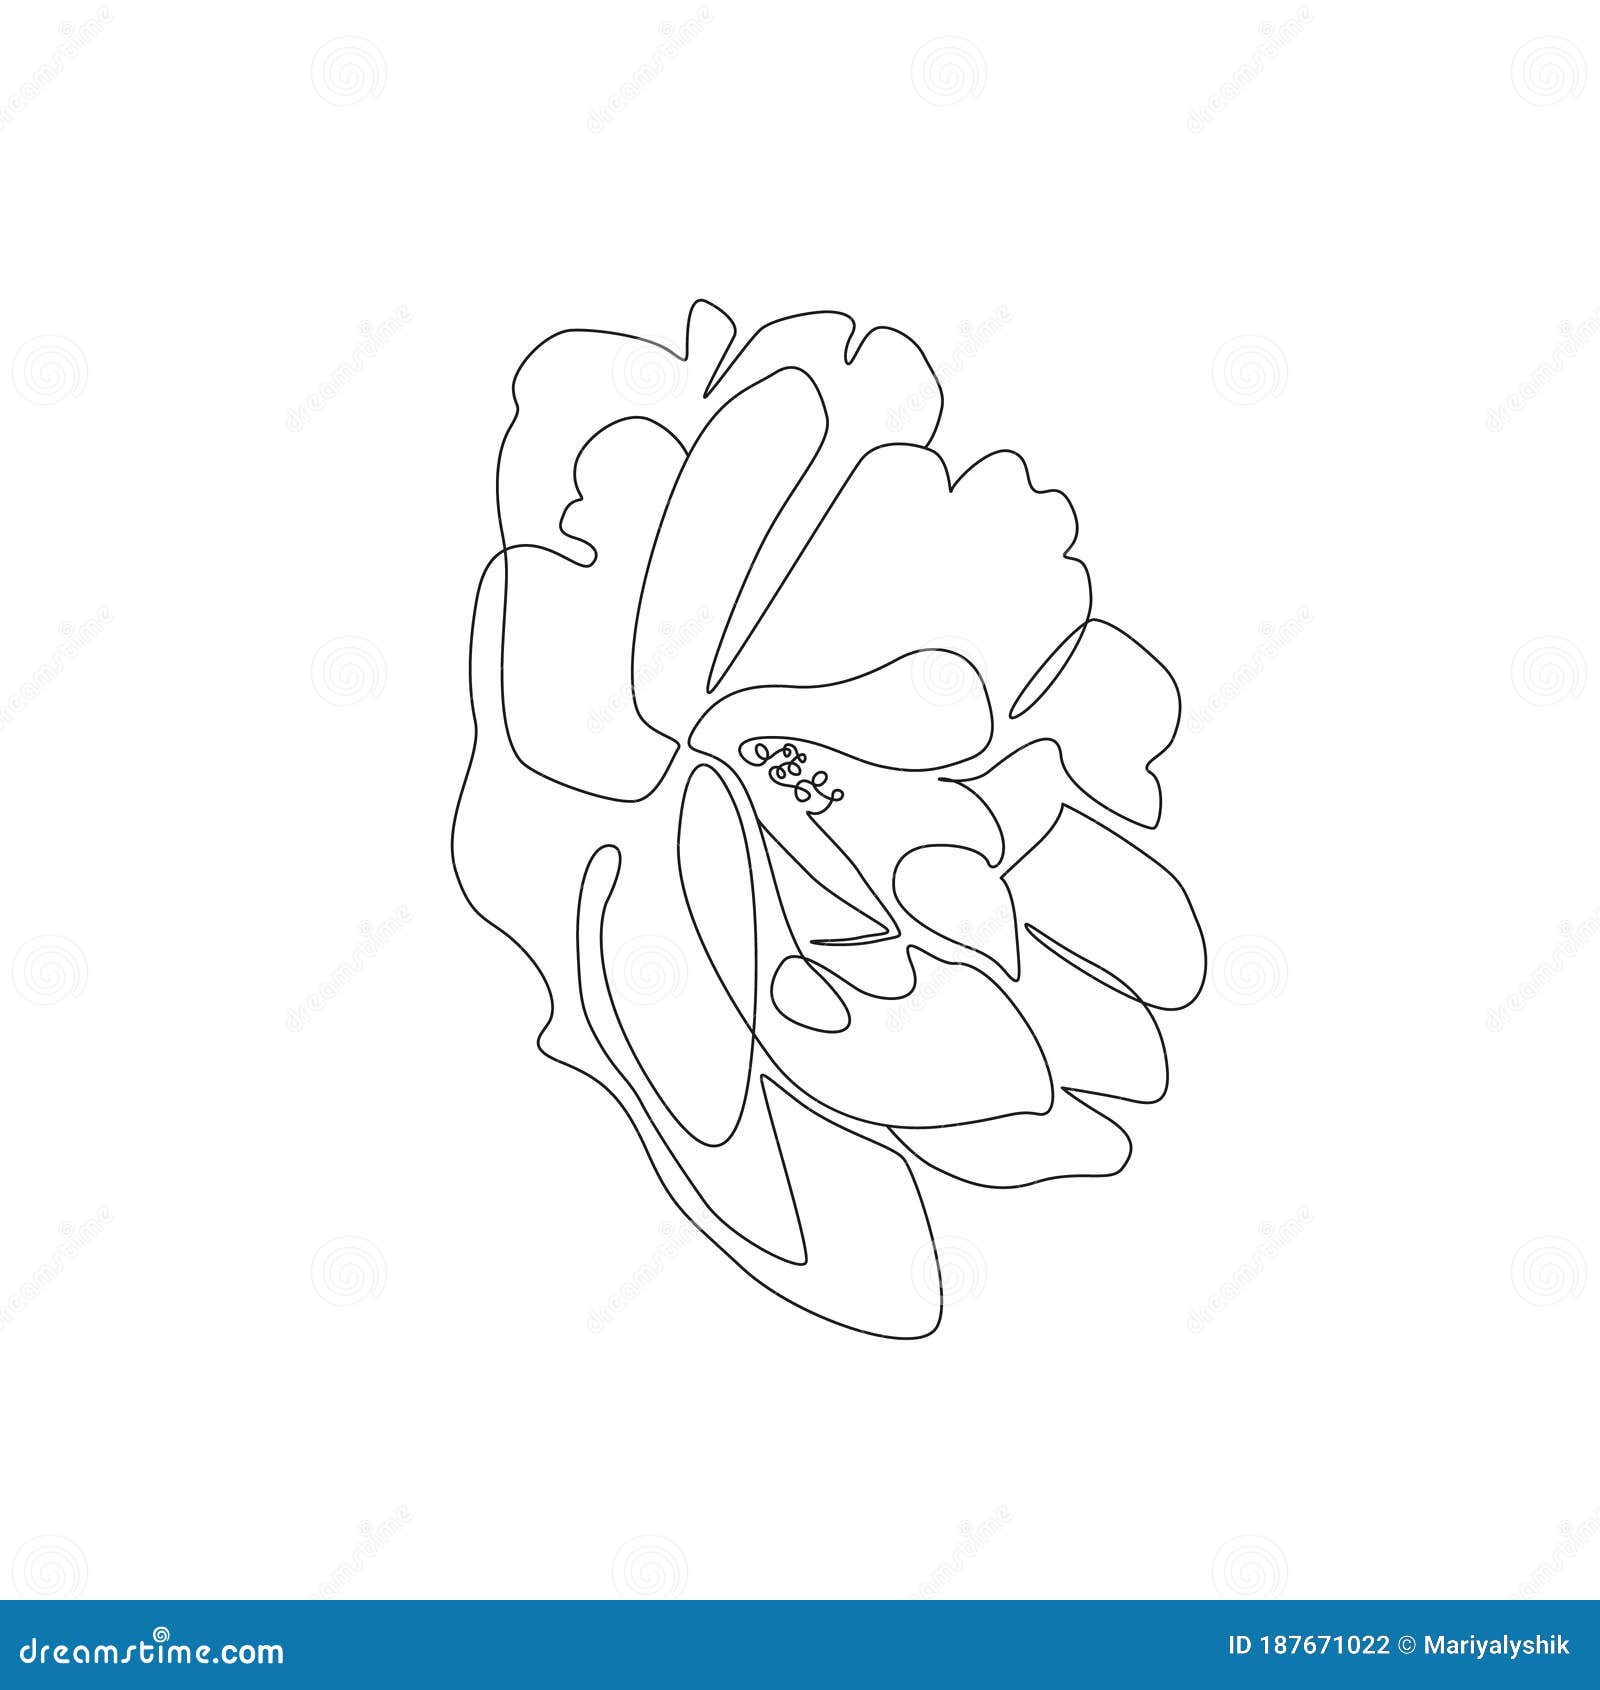 Floral Single Line Illustration One Line Flower Logo Design Peony Outline  Drawing for Print in Minimalist Style Stock Vector  Illustration of  graphic creative 187670985